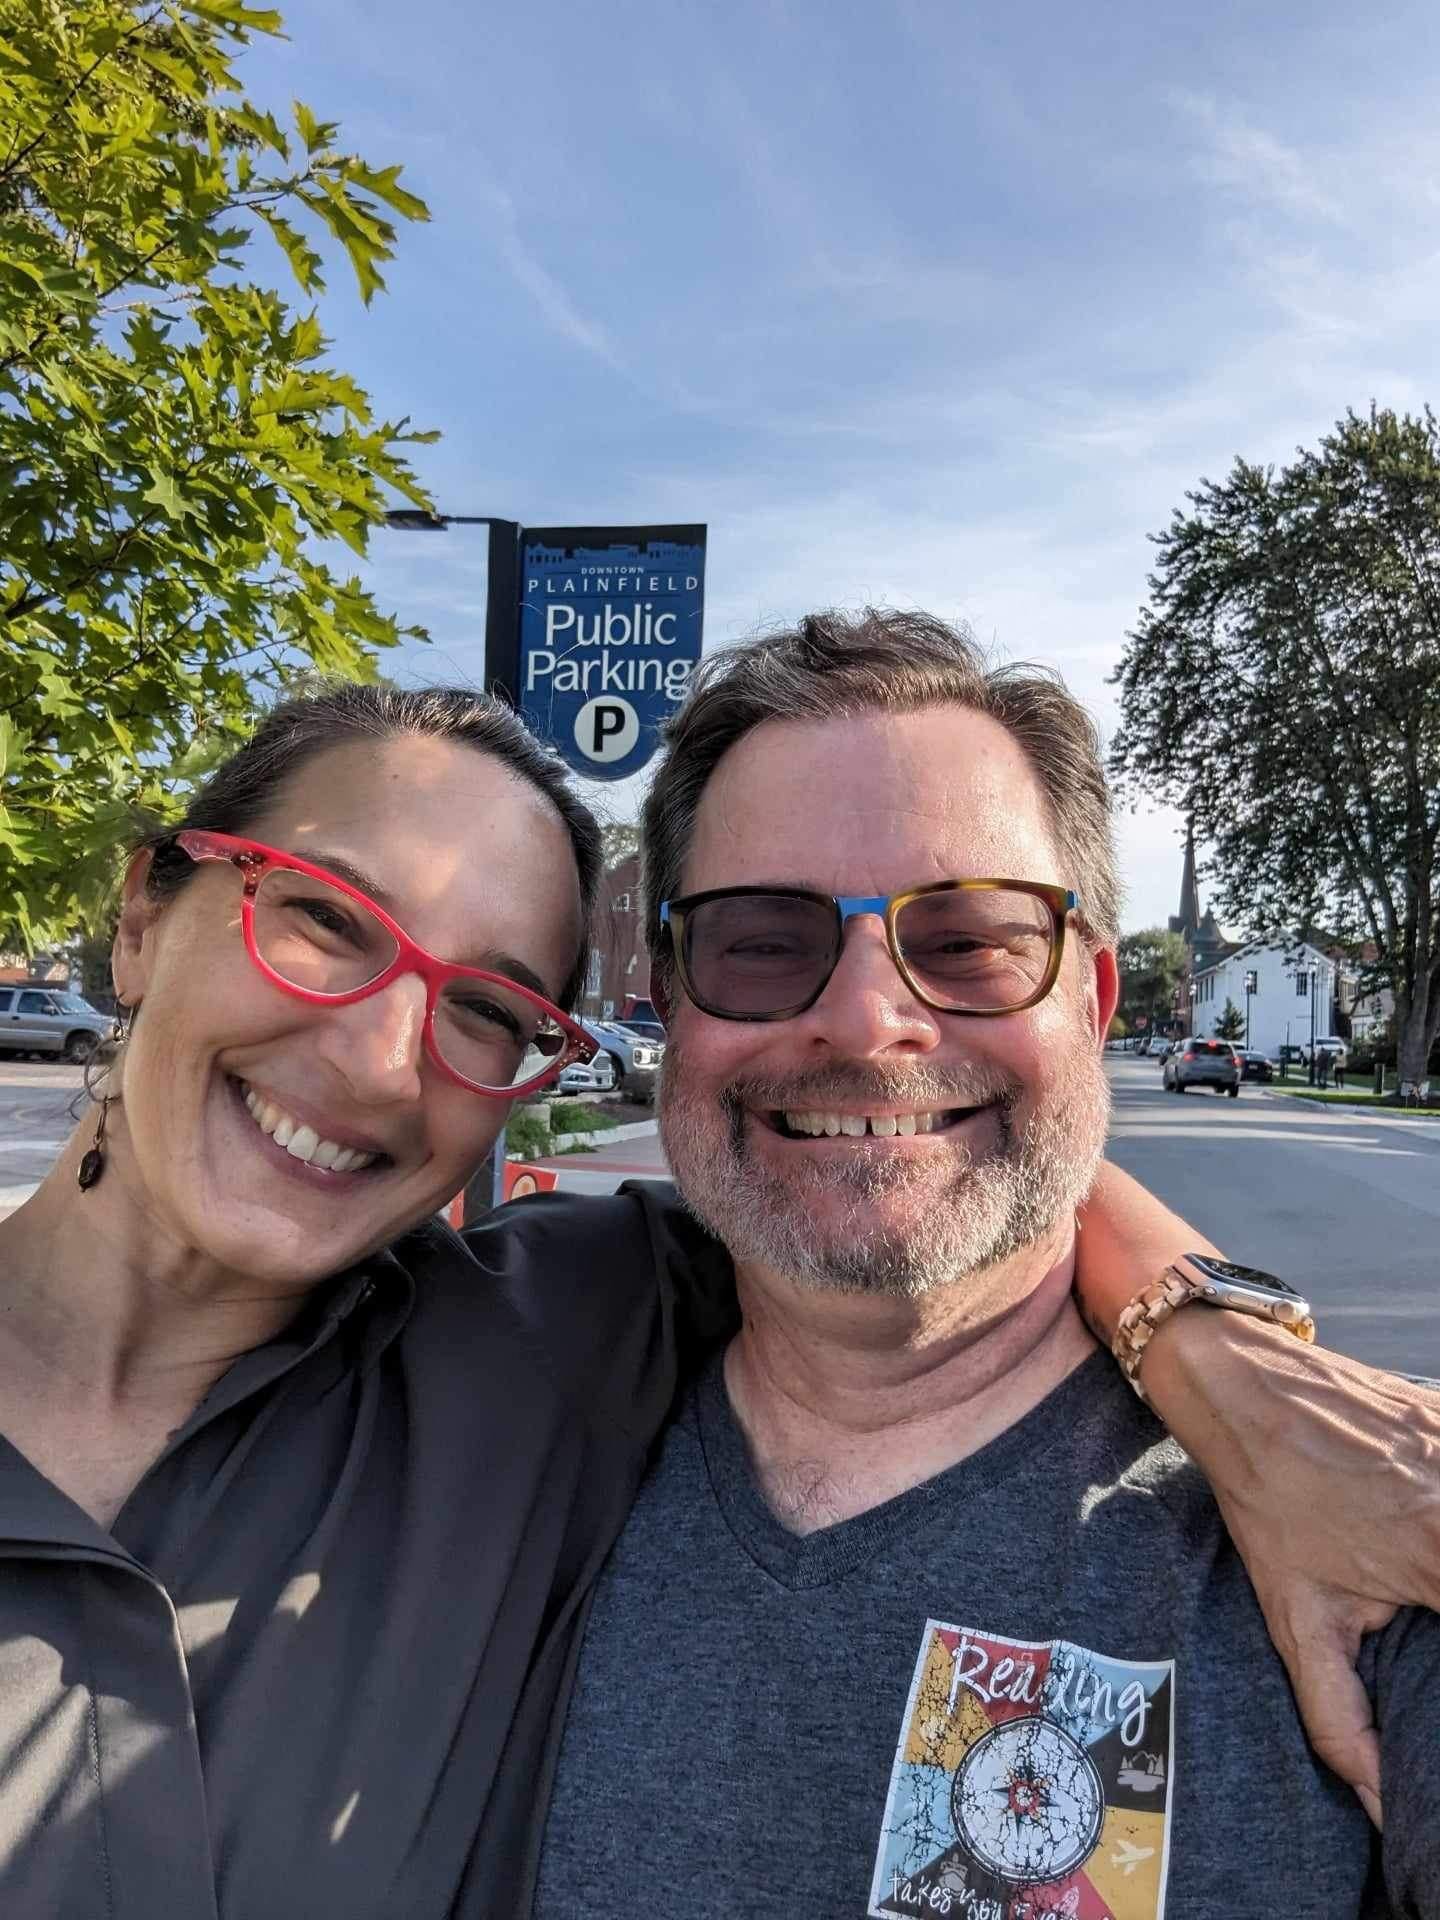 Sonya smiling with red glasses, arm around Carl, smiling with polarized glasses, trees and the library and blue sky in background and a sign hanging from the lamp post that says Plainfield Public Parking